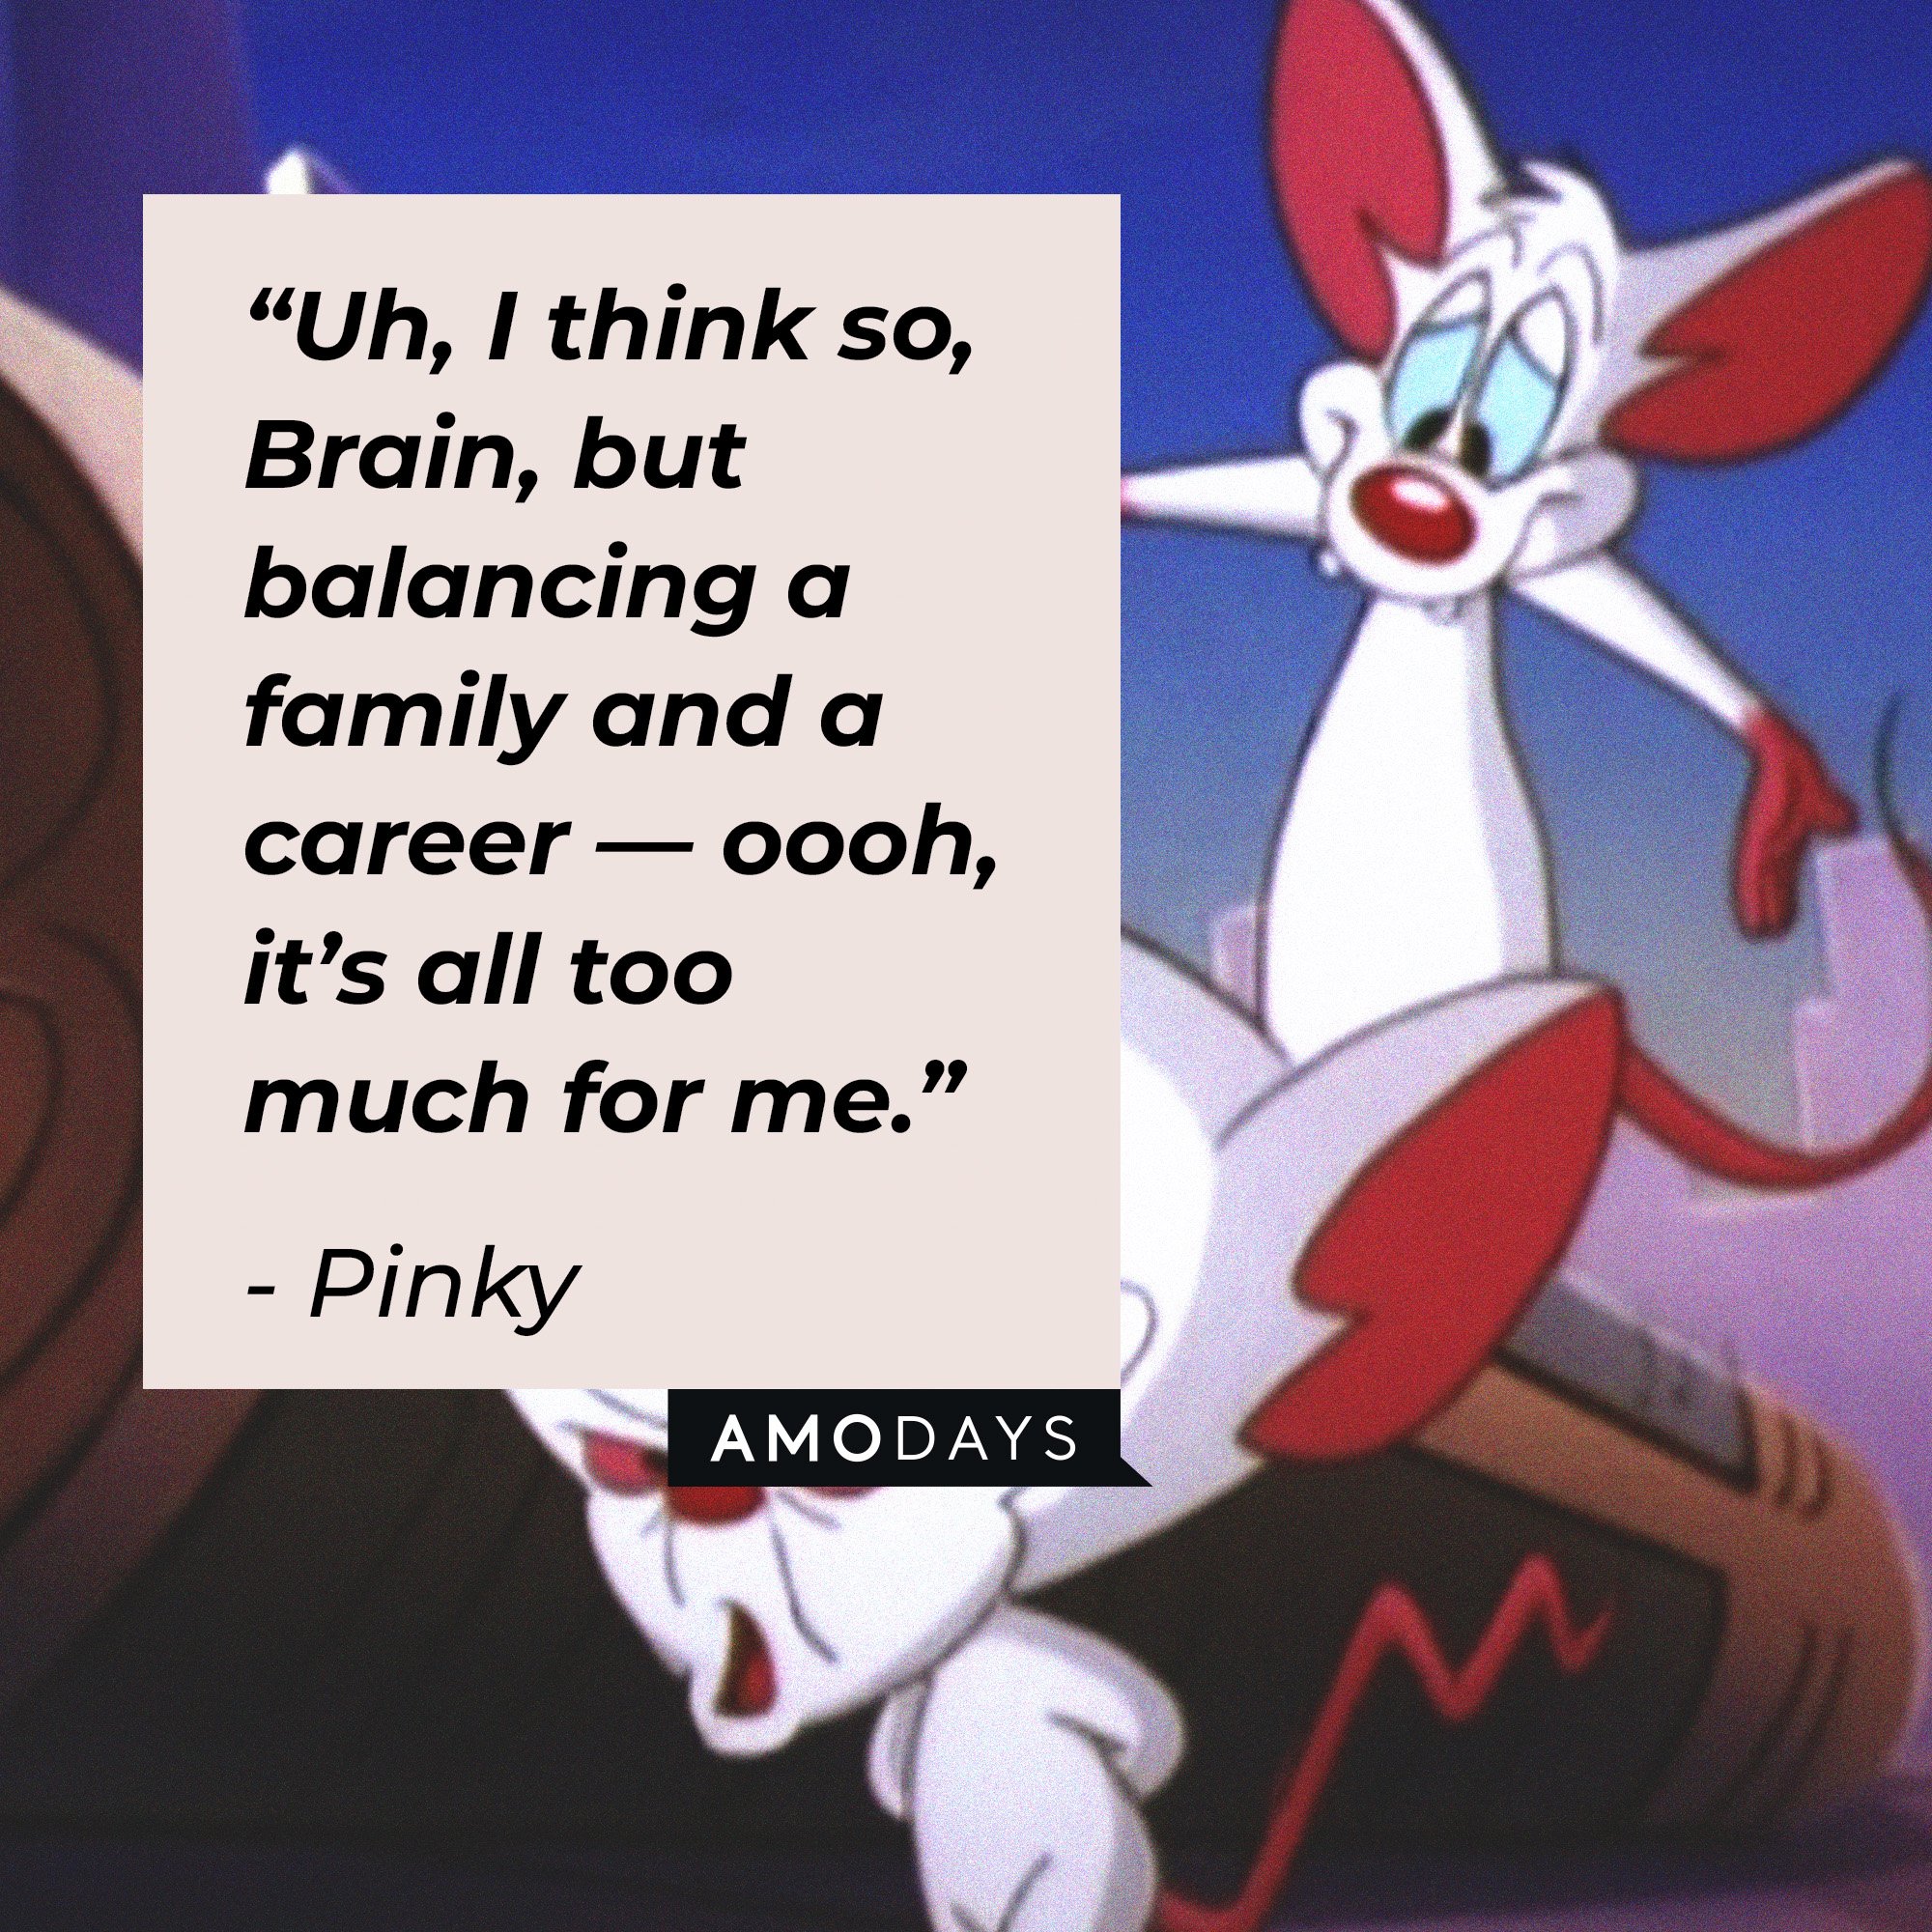 Pinky's quote: “Uh, I think so, Brain, but balancing a family and a career — oooh, it’s all too much for me.” | Image: AmoDays